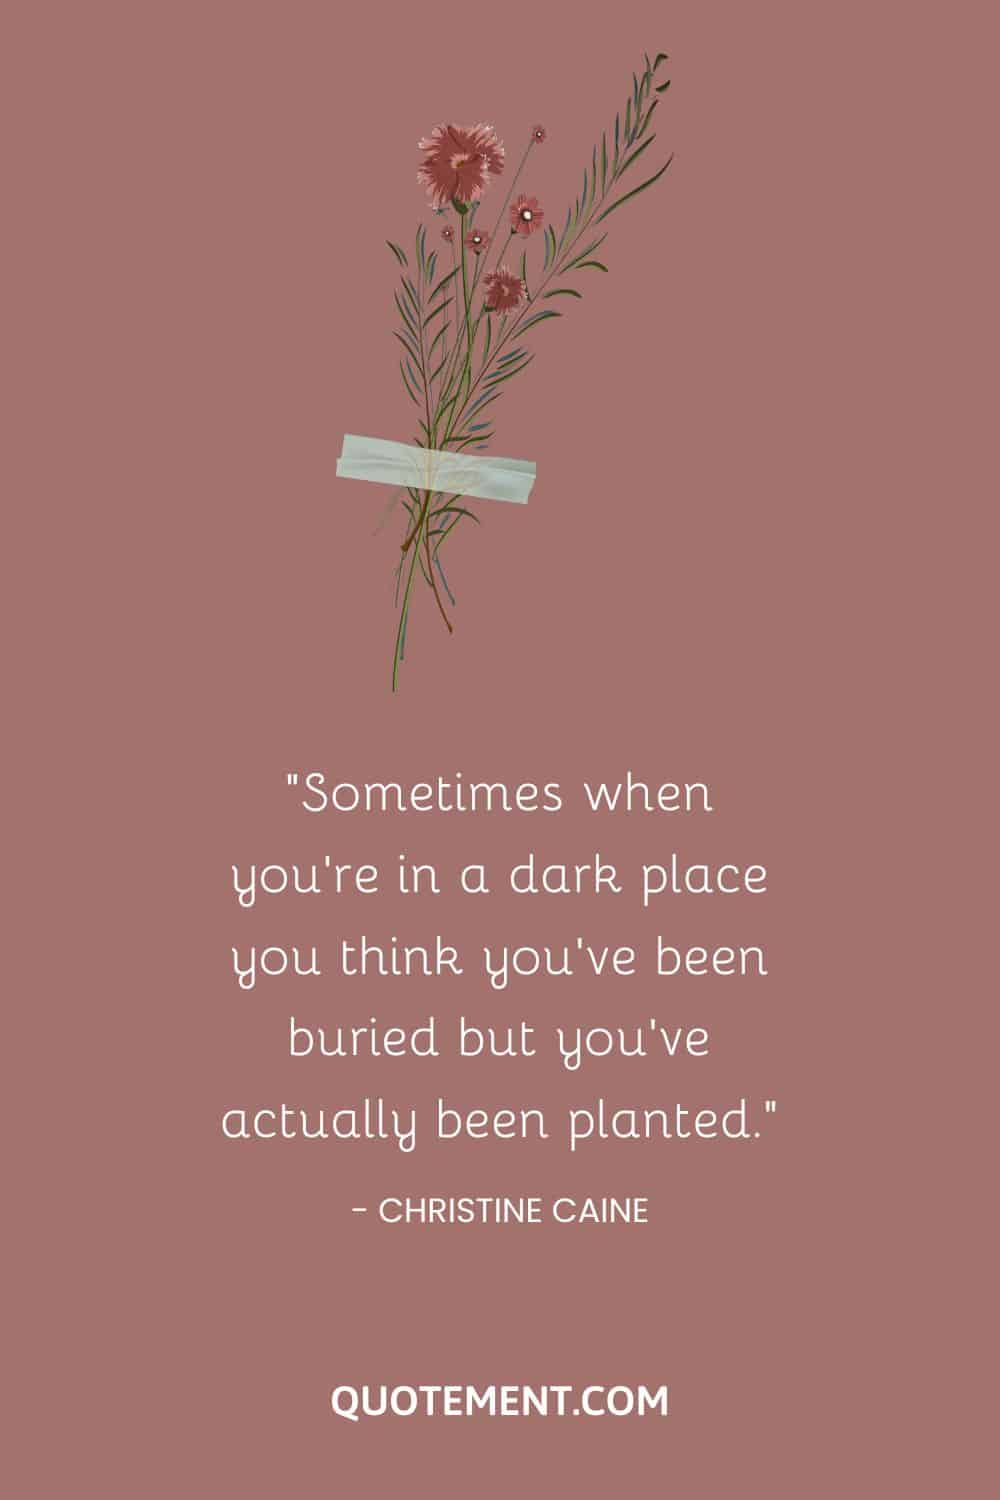 Sometimes when you’re in a dark place you think you’ve been buried but you’ve actually been planted